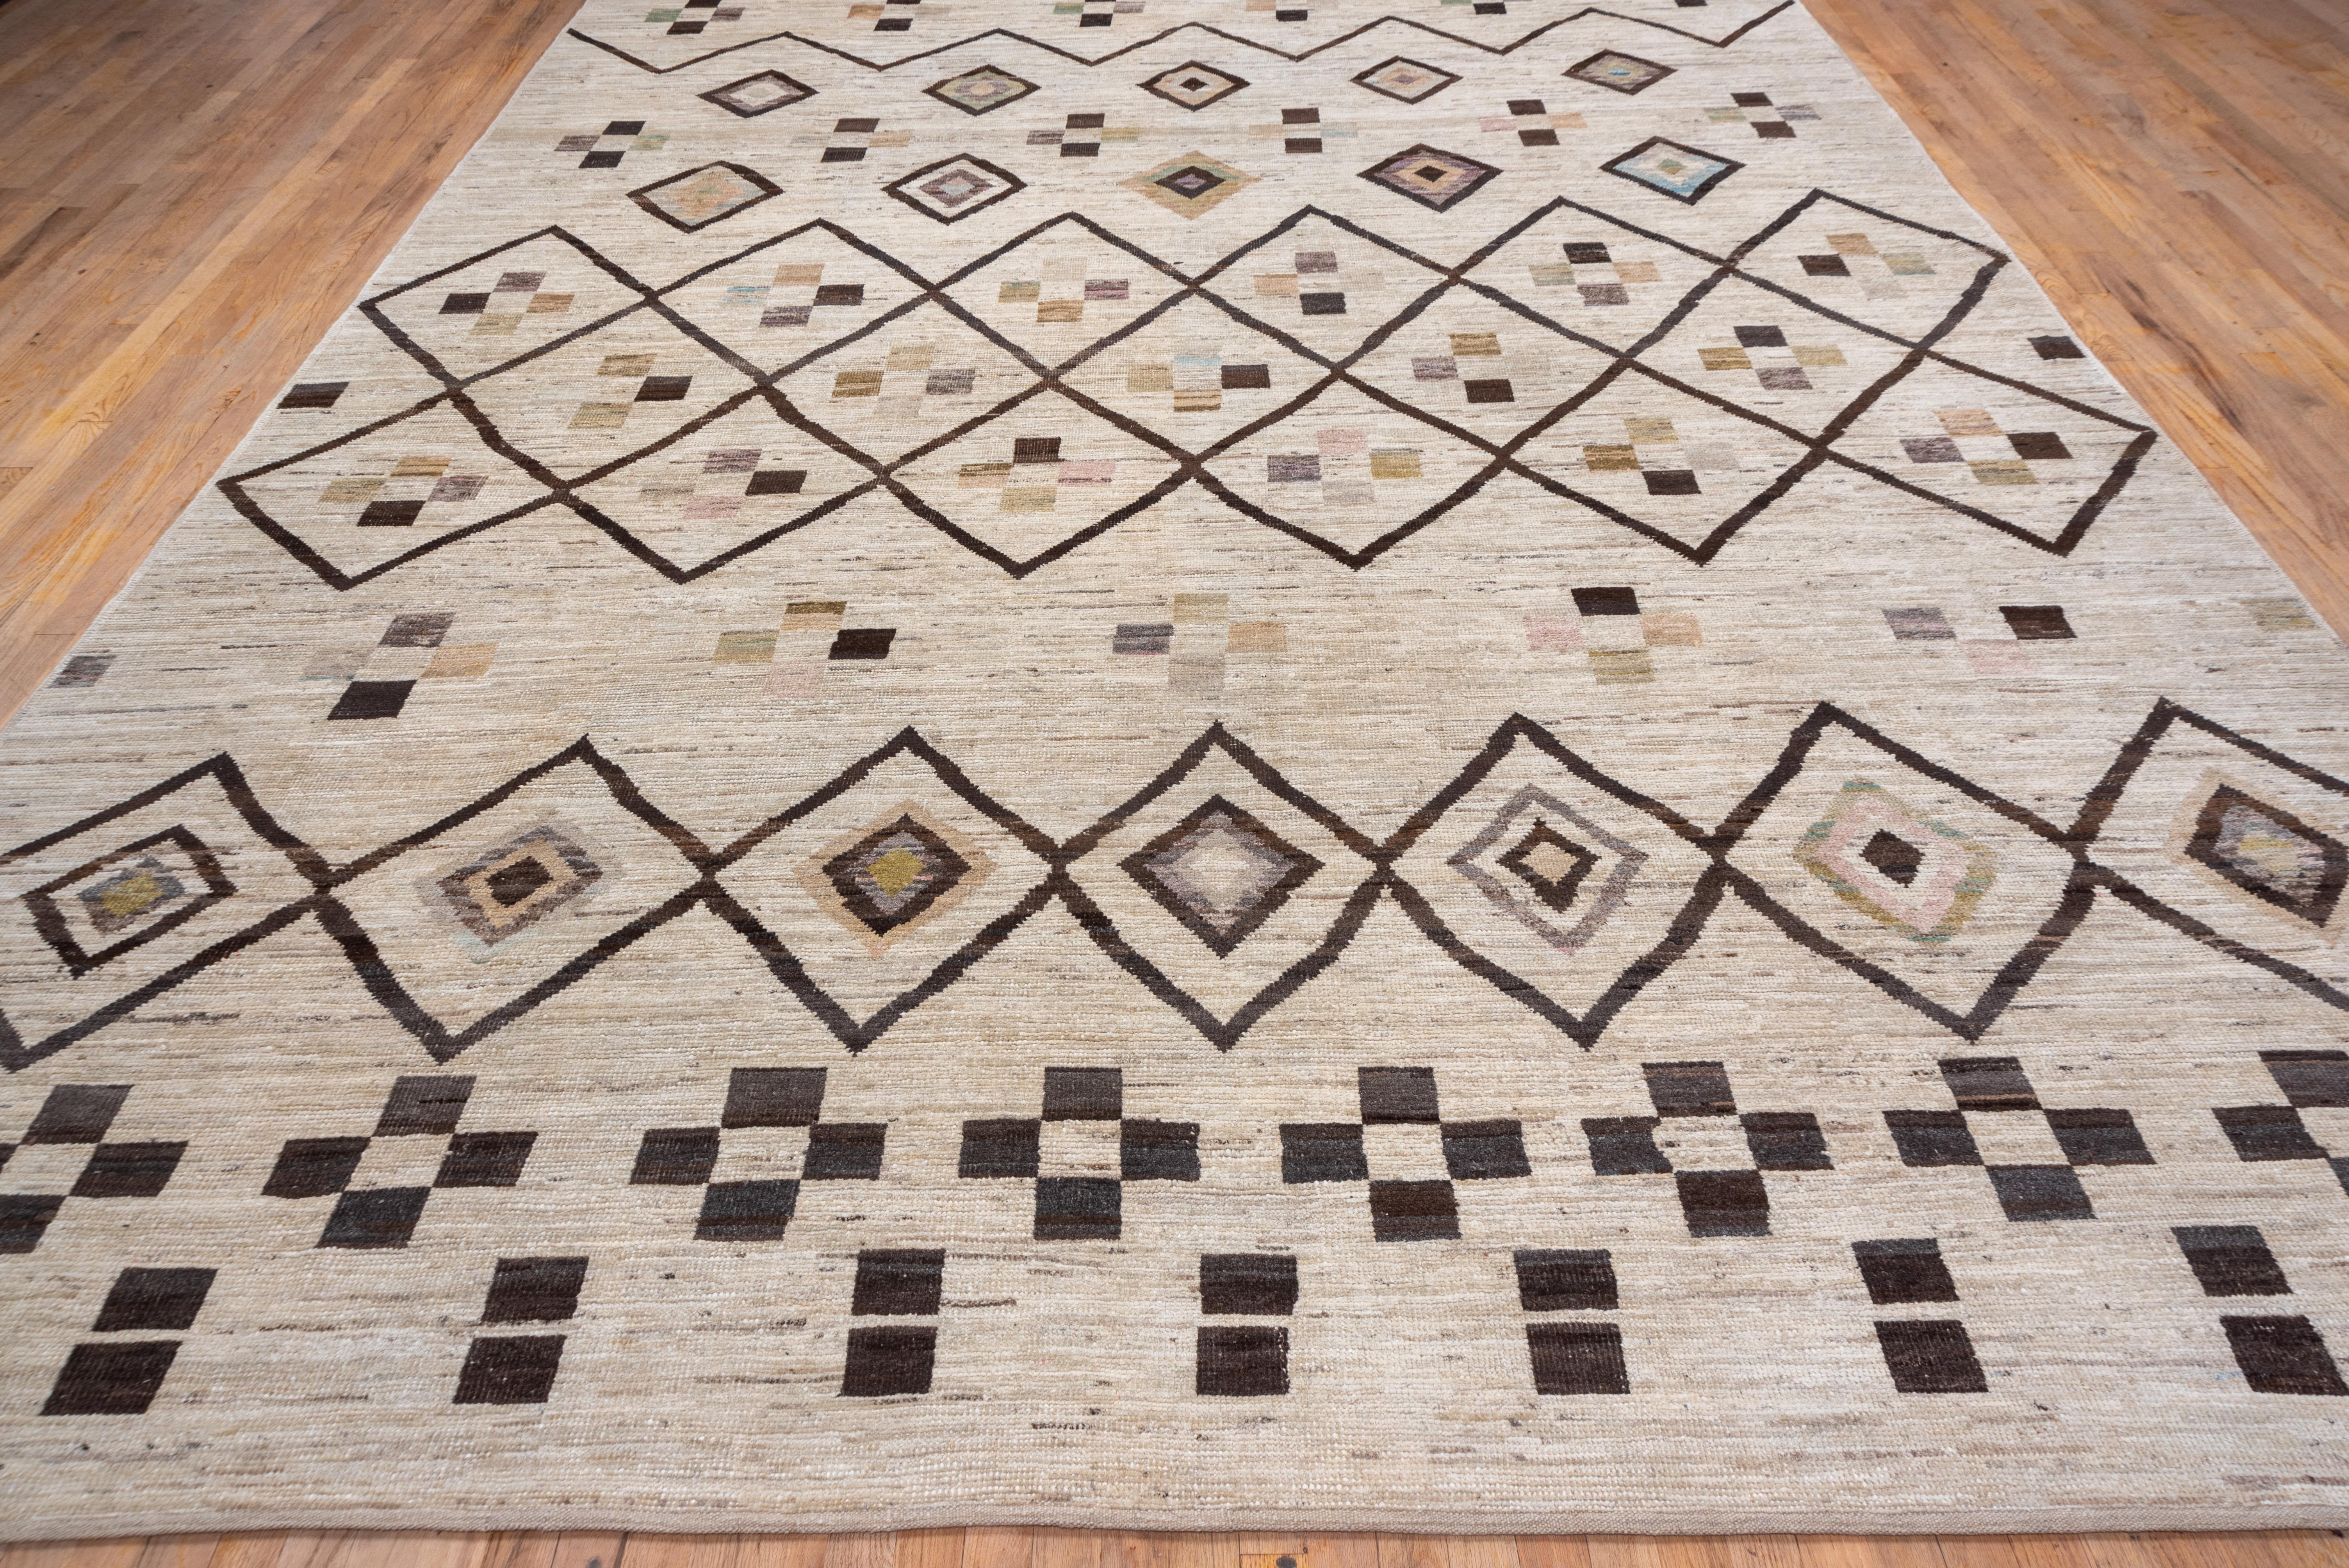 This Azilal-style rustic tallish pile room size shows a nested lozenge lattice, and small floating diamond design, with rows of ornaments of small squares. Sand ground with dark brown and lighter accents.